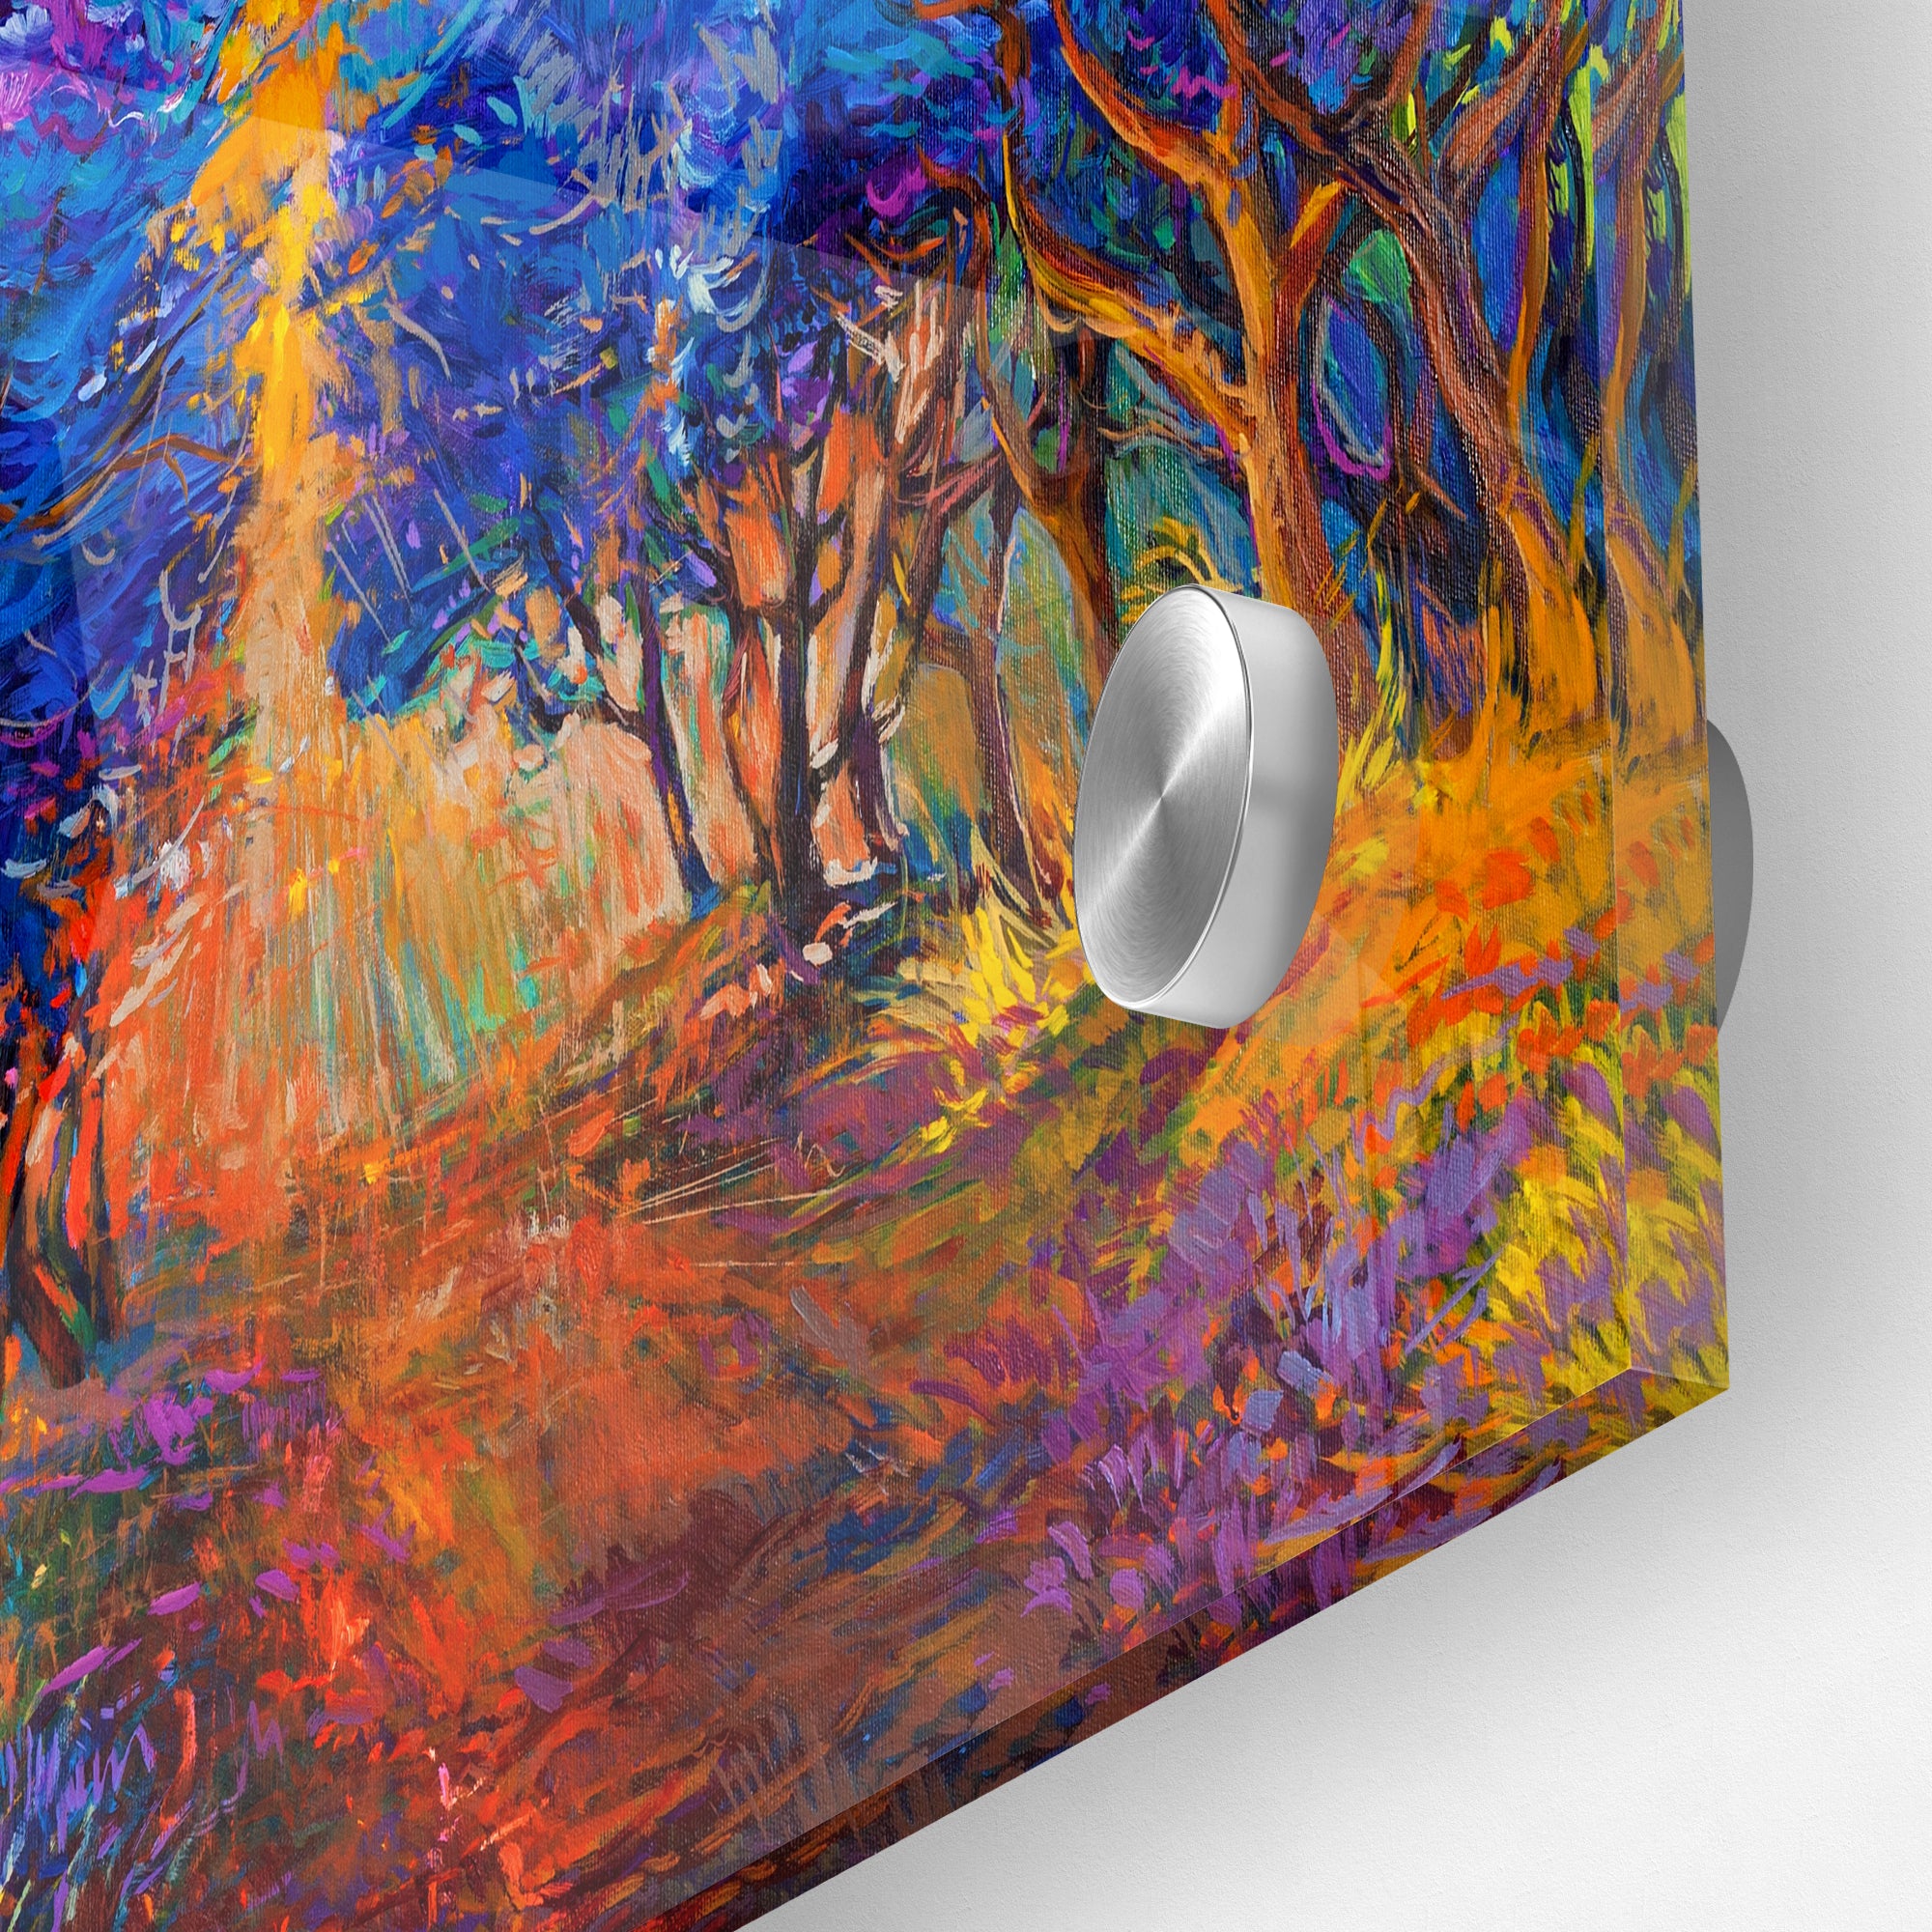 Blue Autumn Forest Acrylic Wall Painting